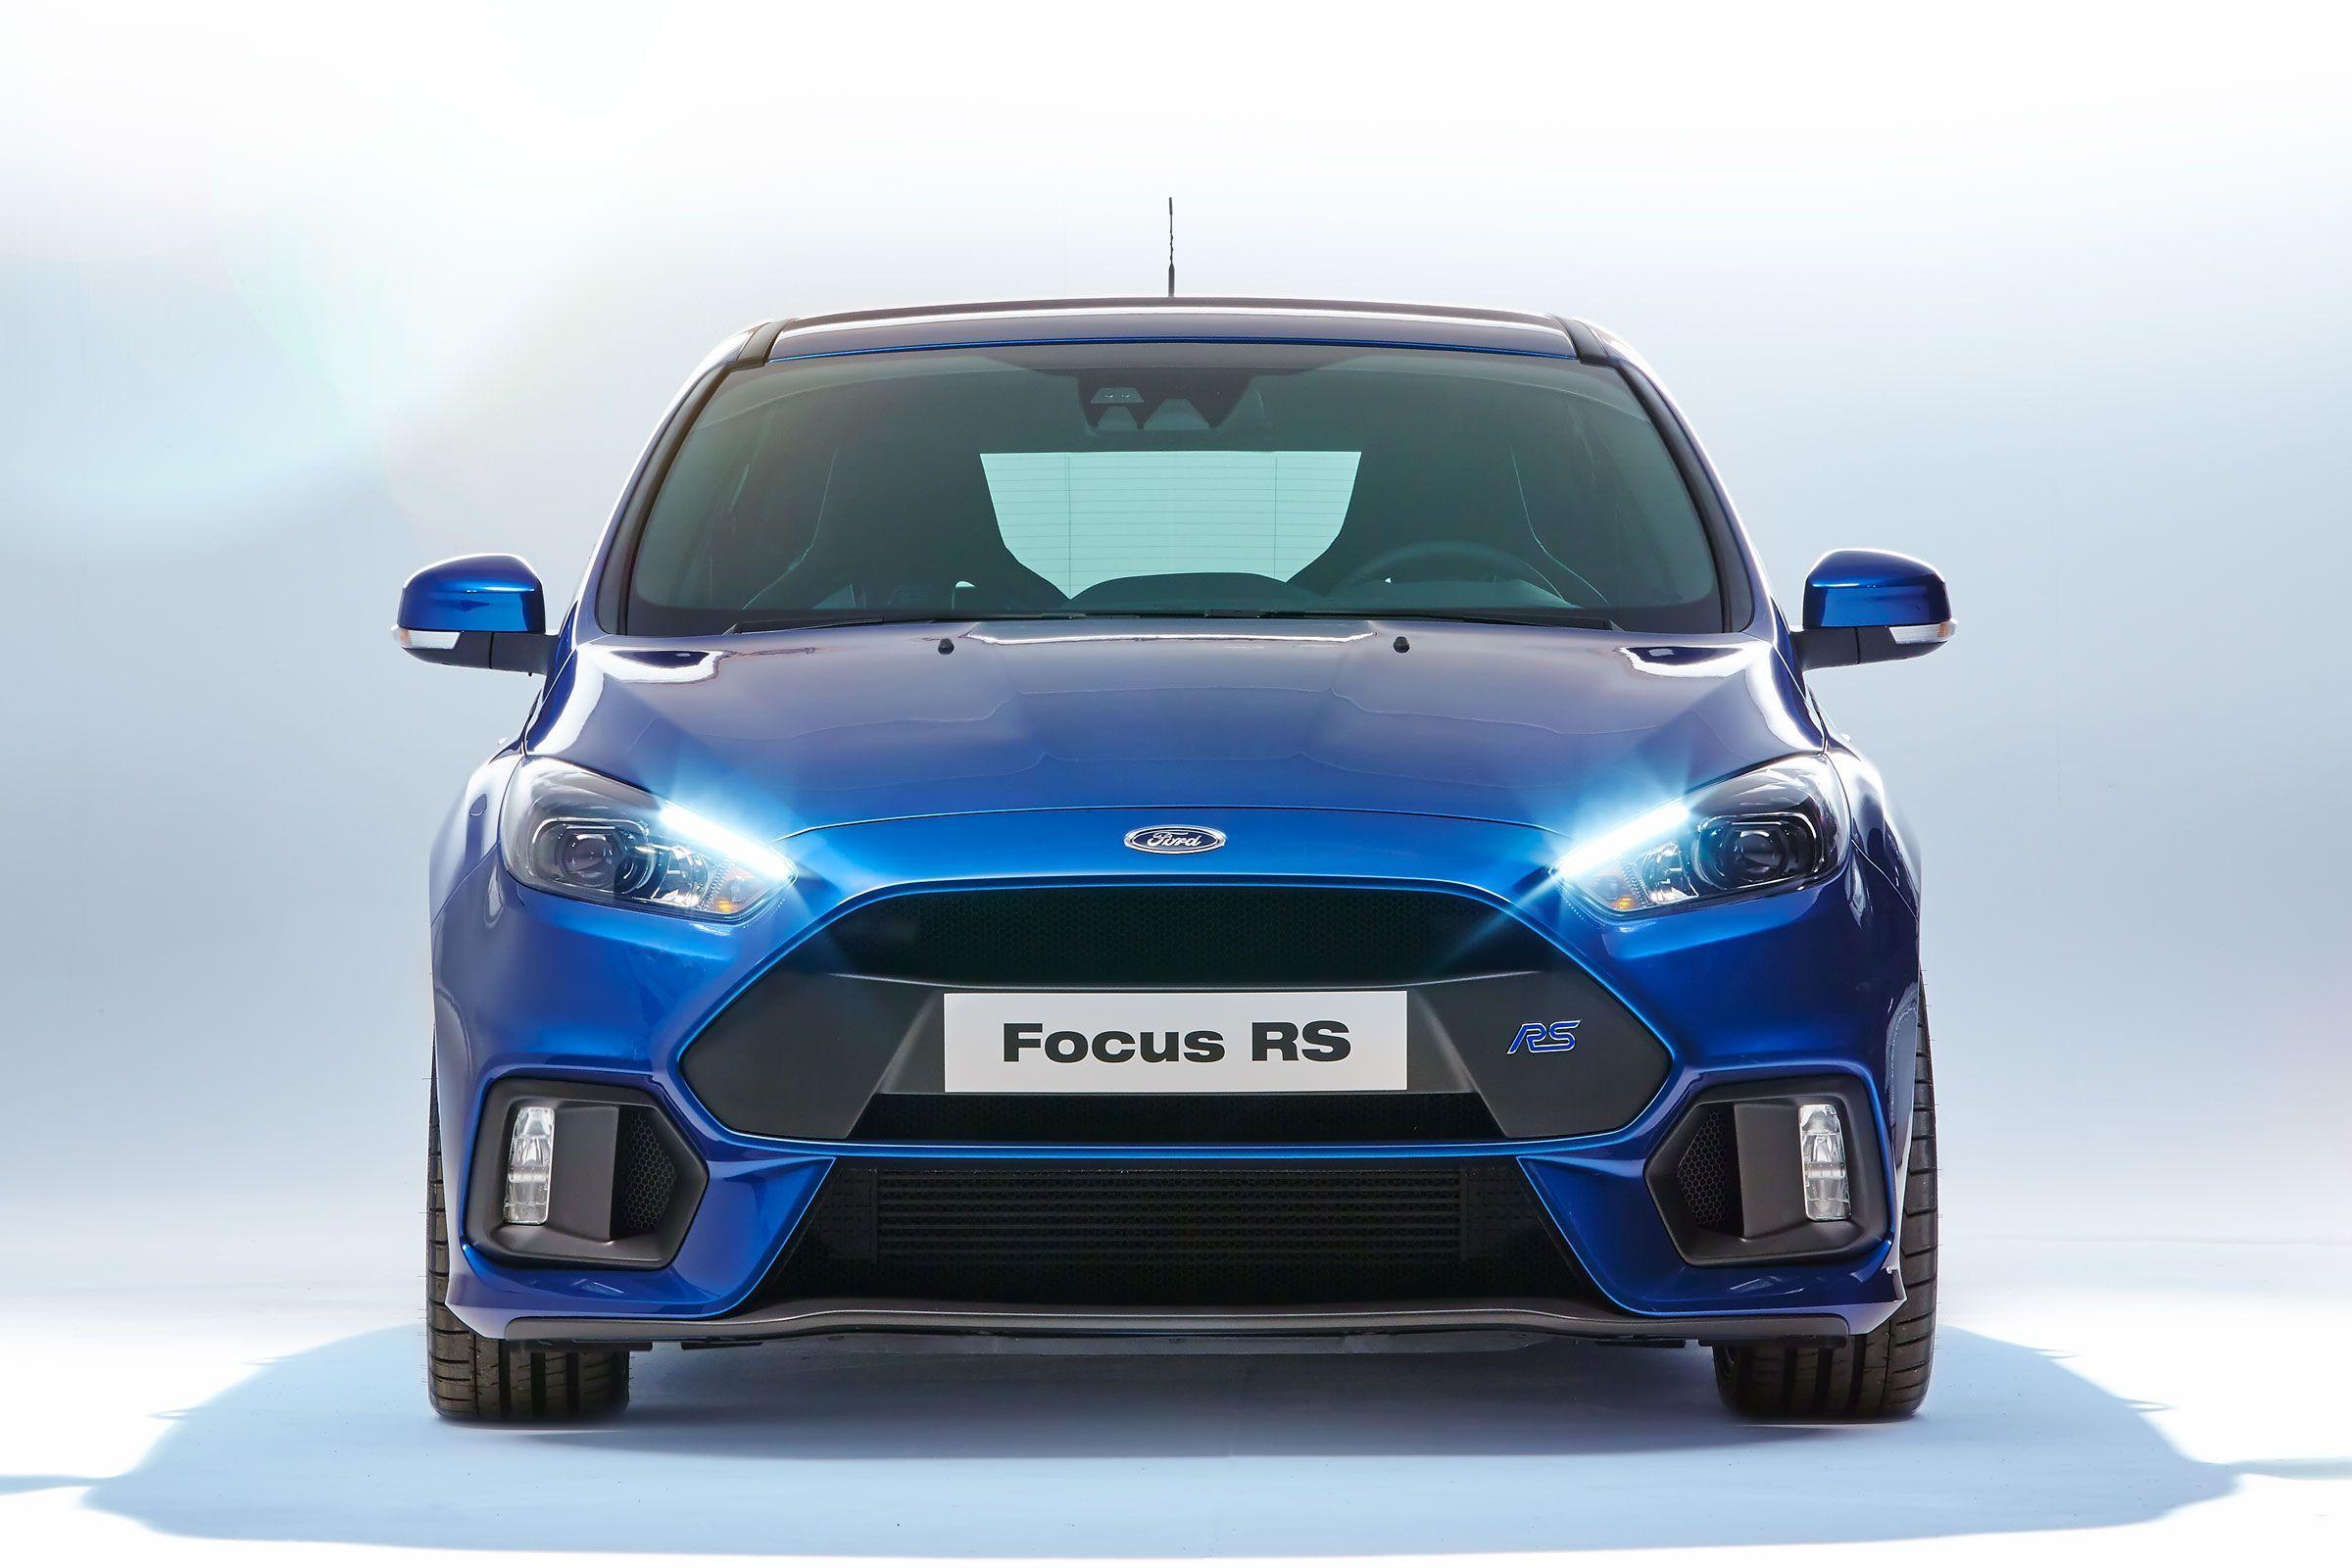 Ford Focus RS 2016 HD wallpaper free download